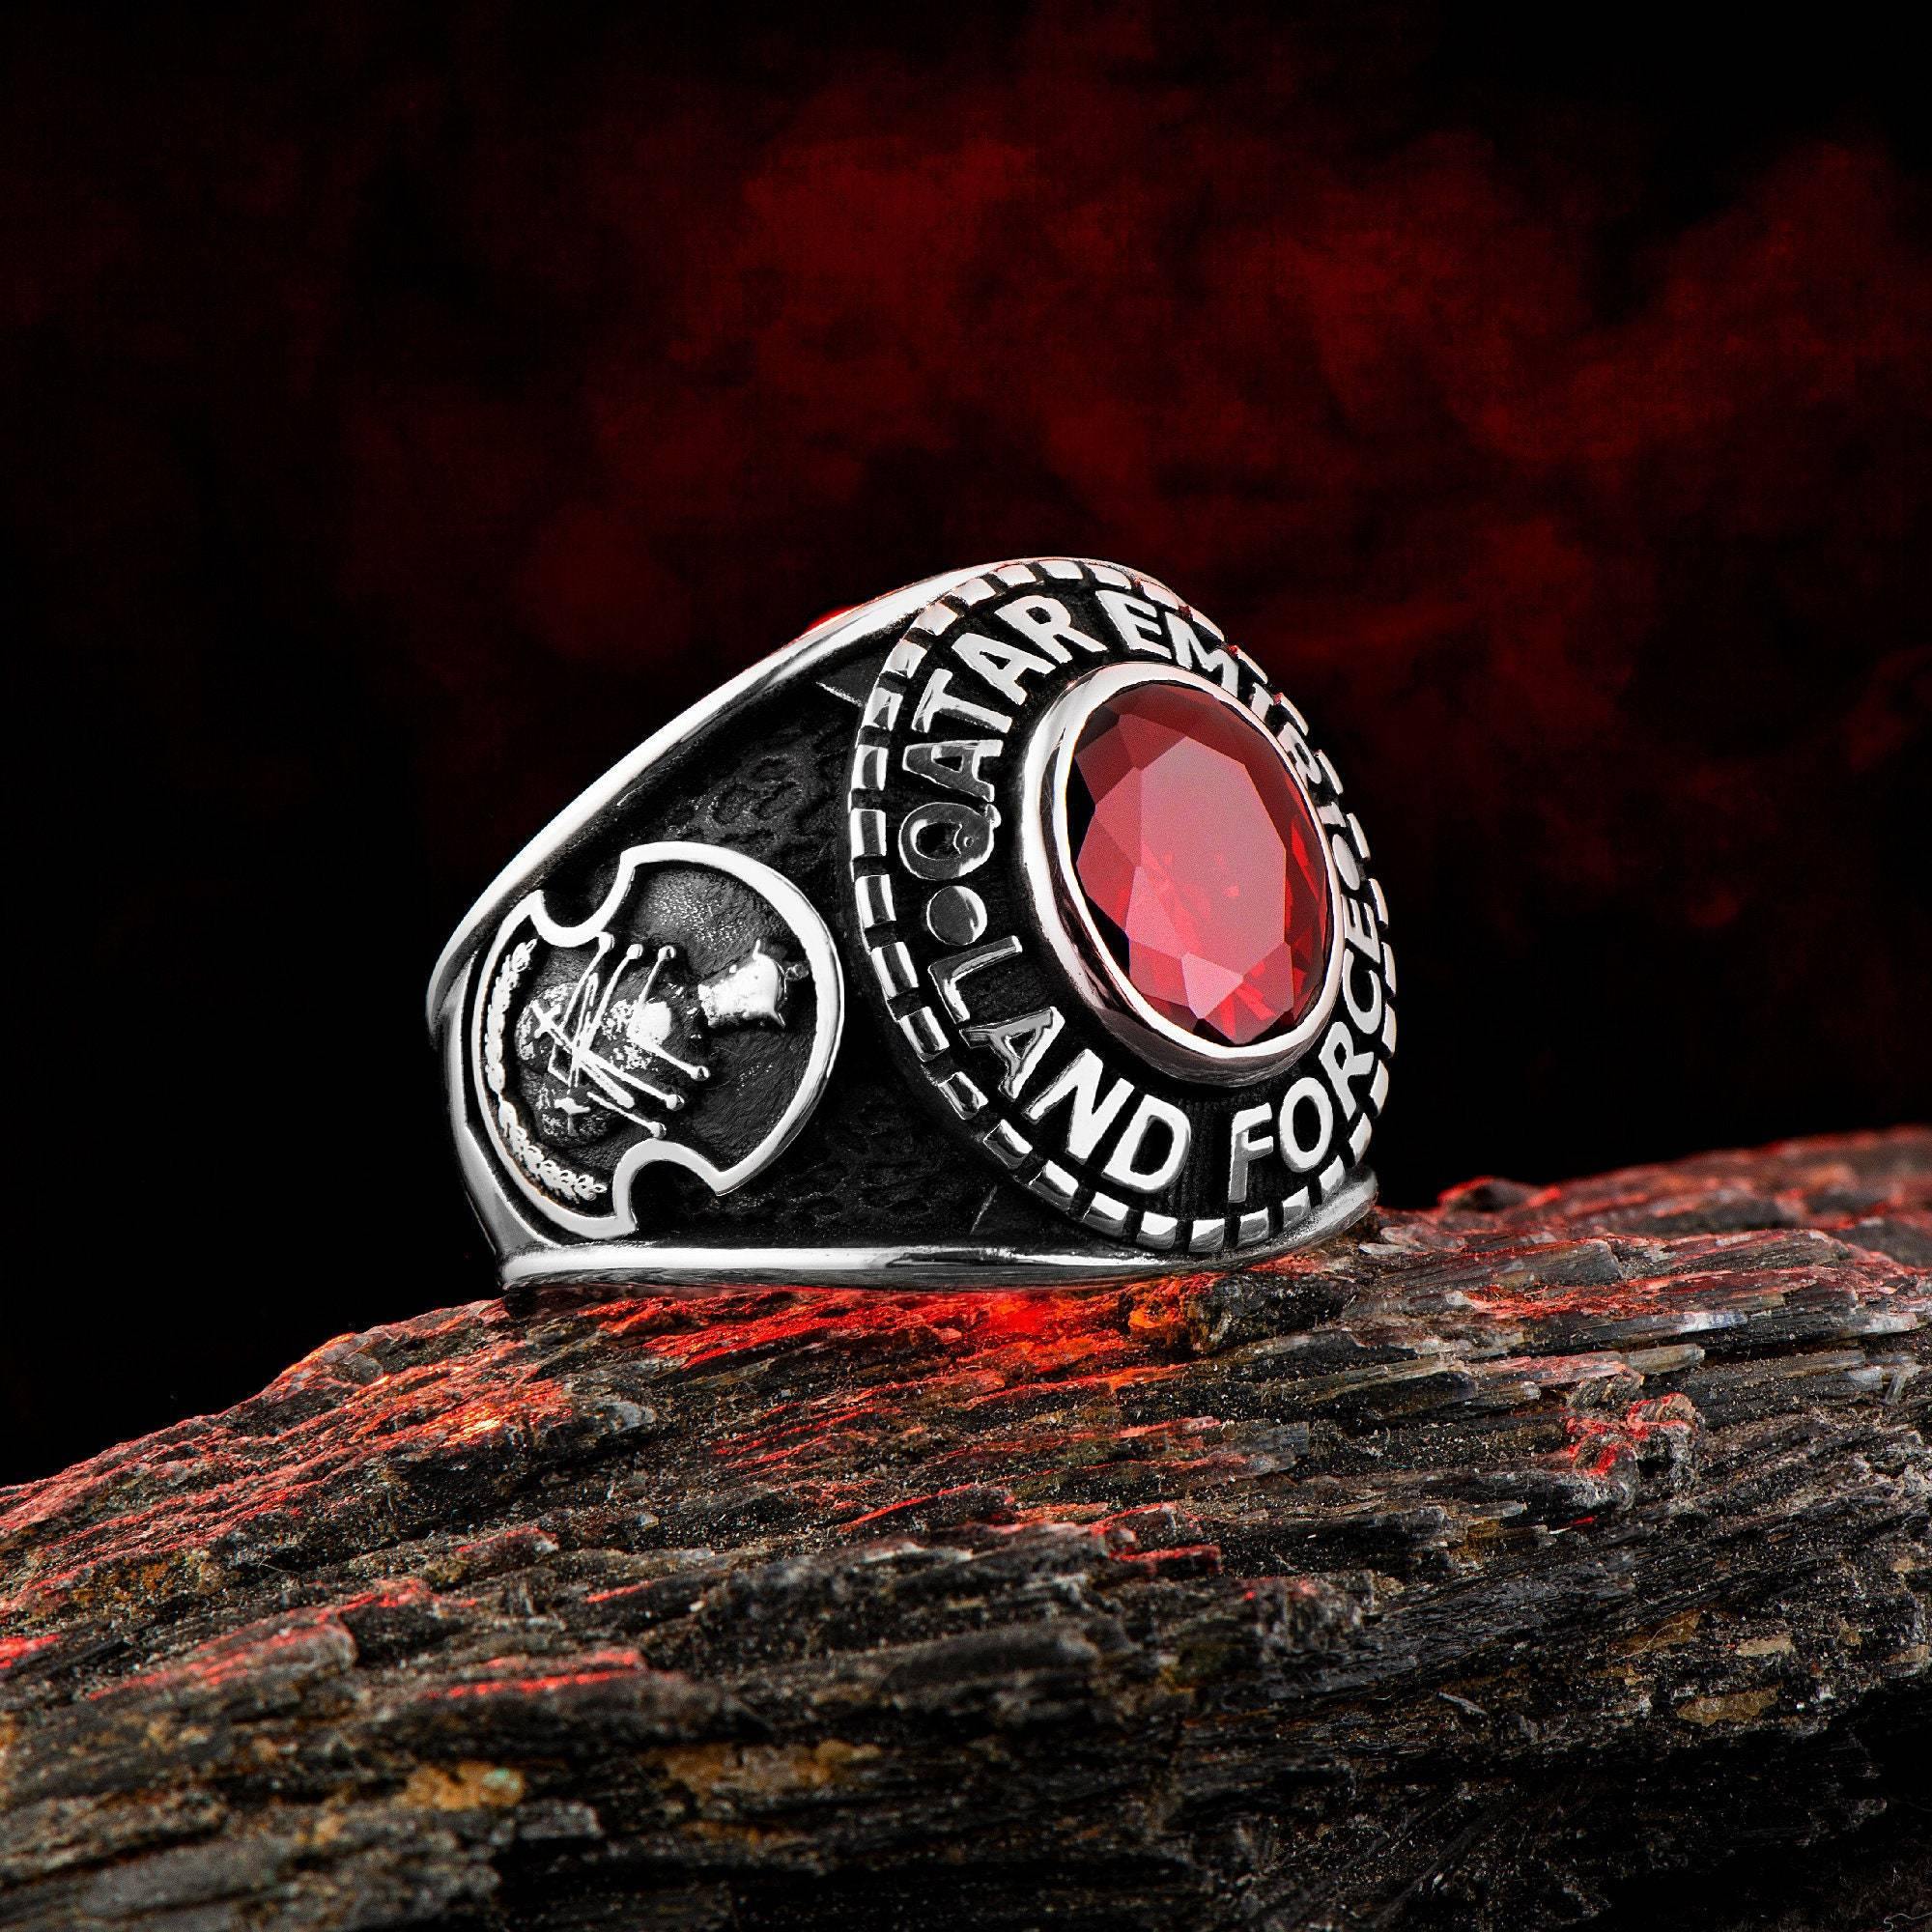 Qatar Emiri Land Force Men's Silver Ring, Military Rings with Red Zircon Gemstone Ring - OXO SILVER